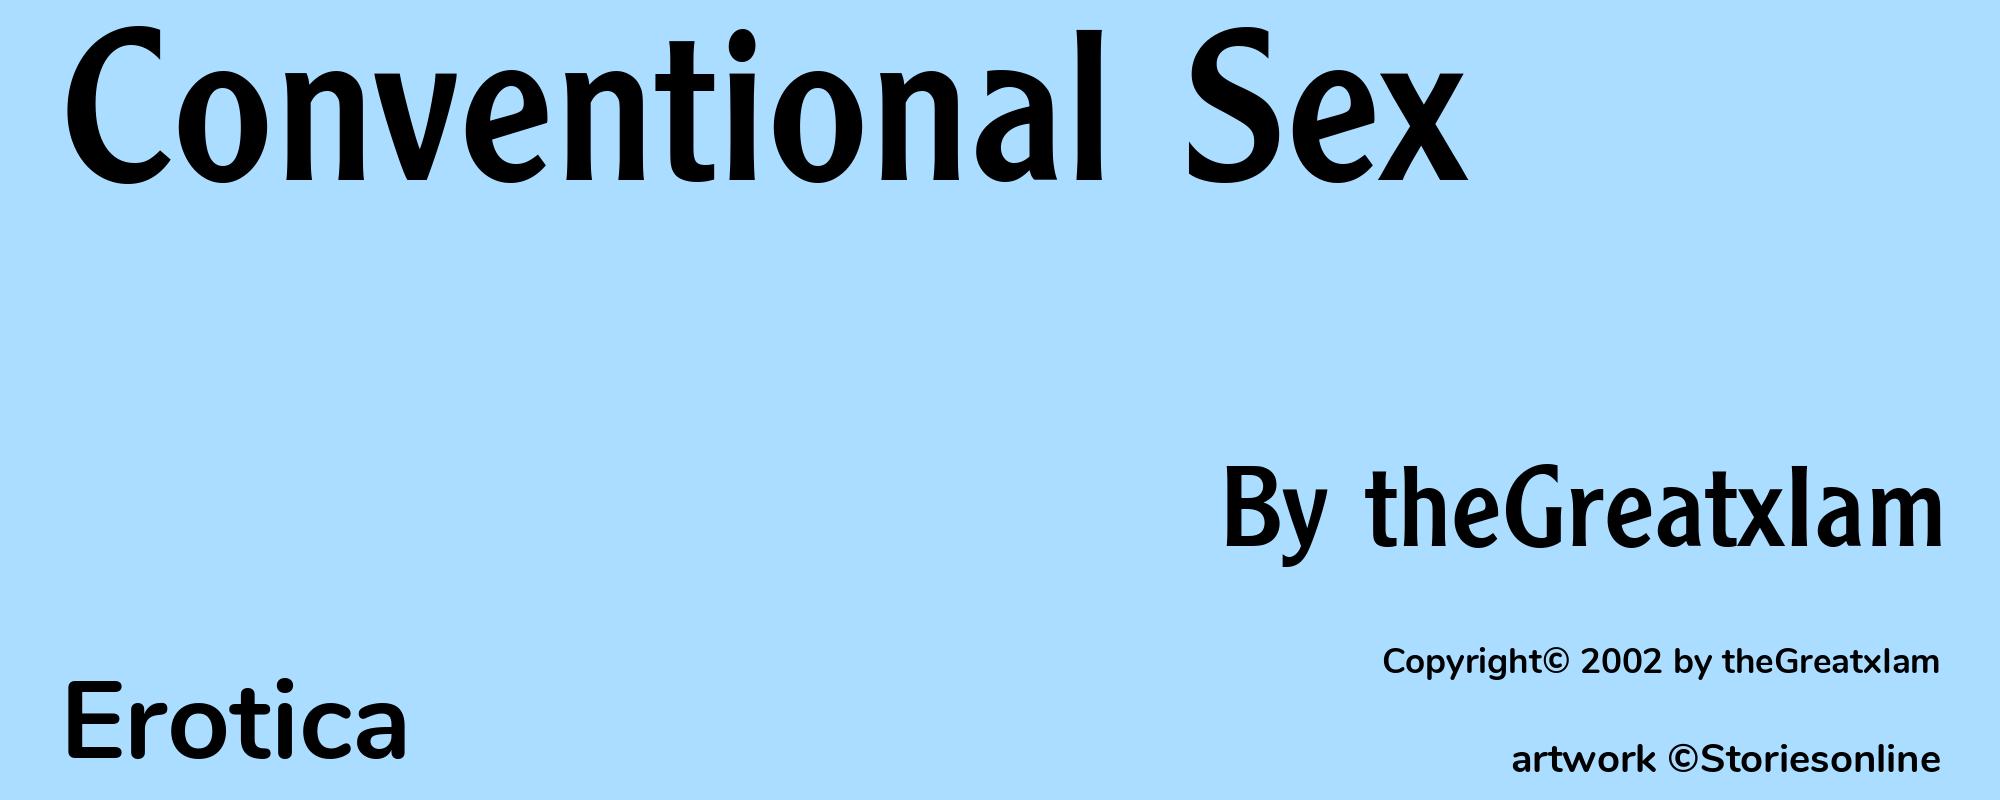 Conventional Sex - Cover